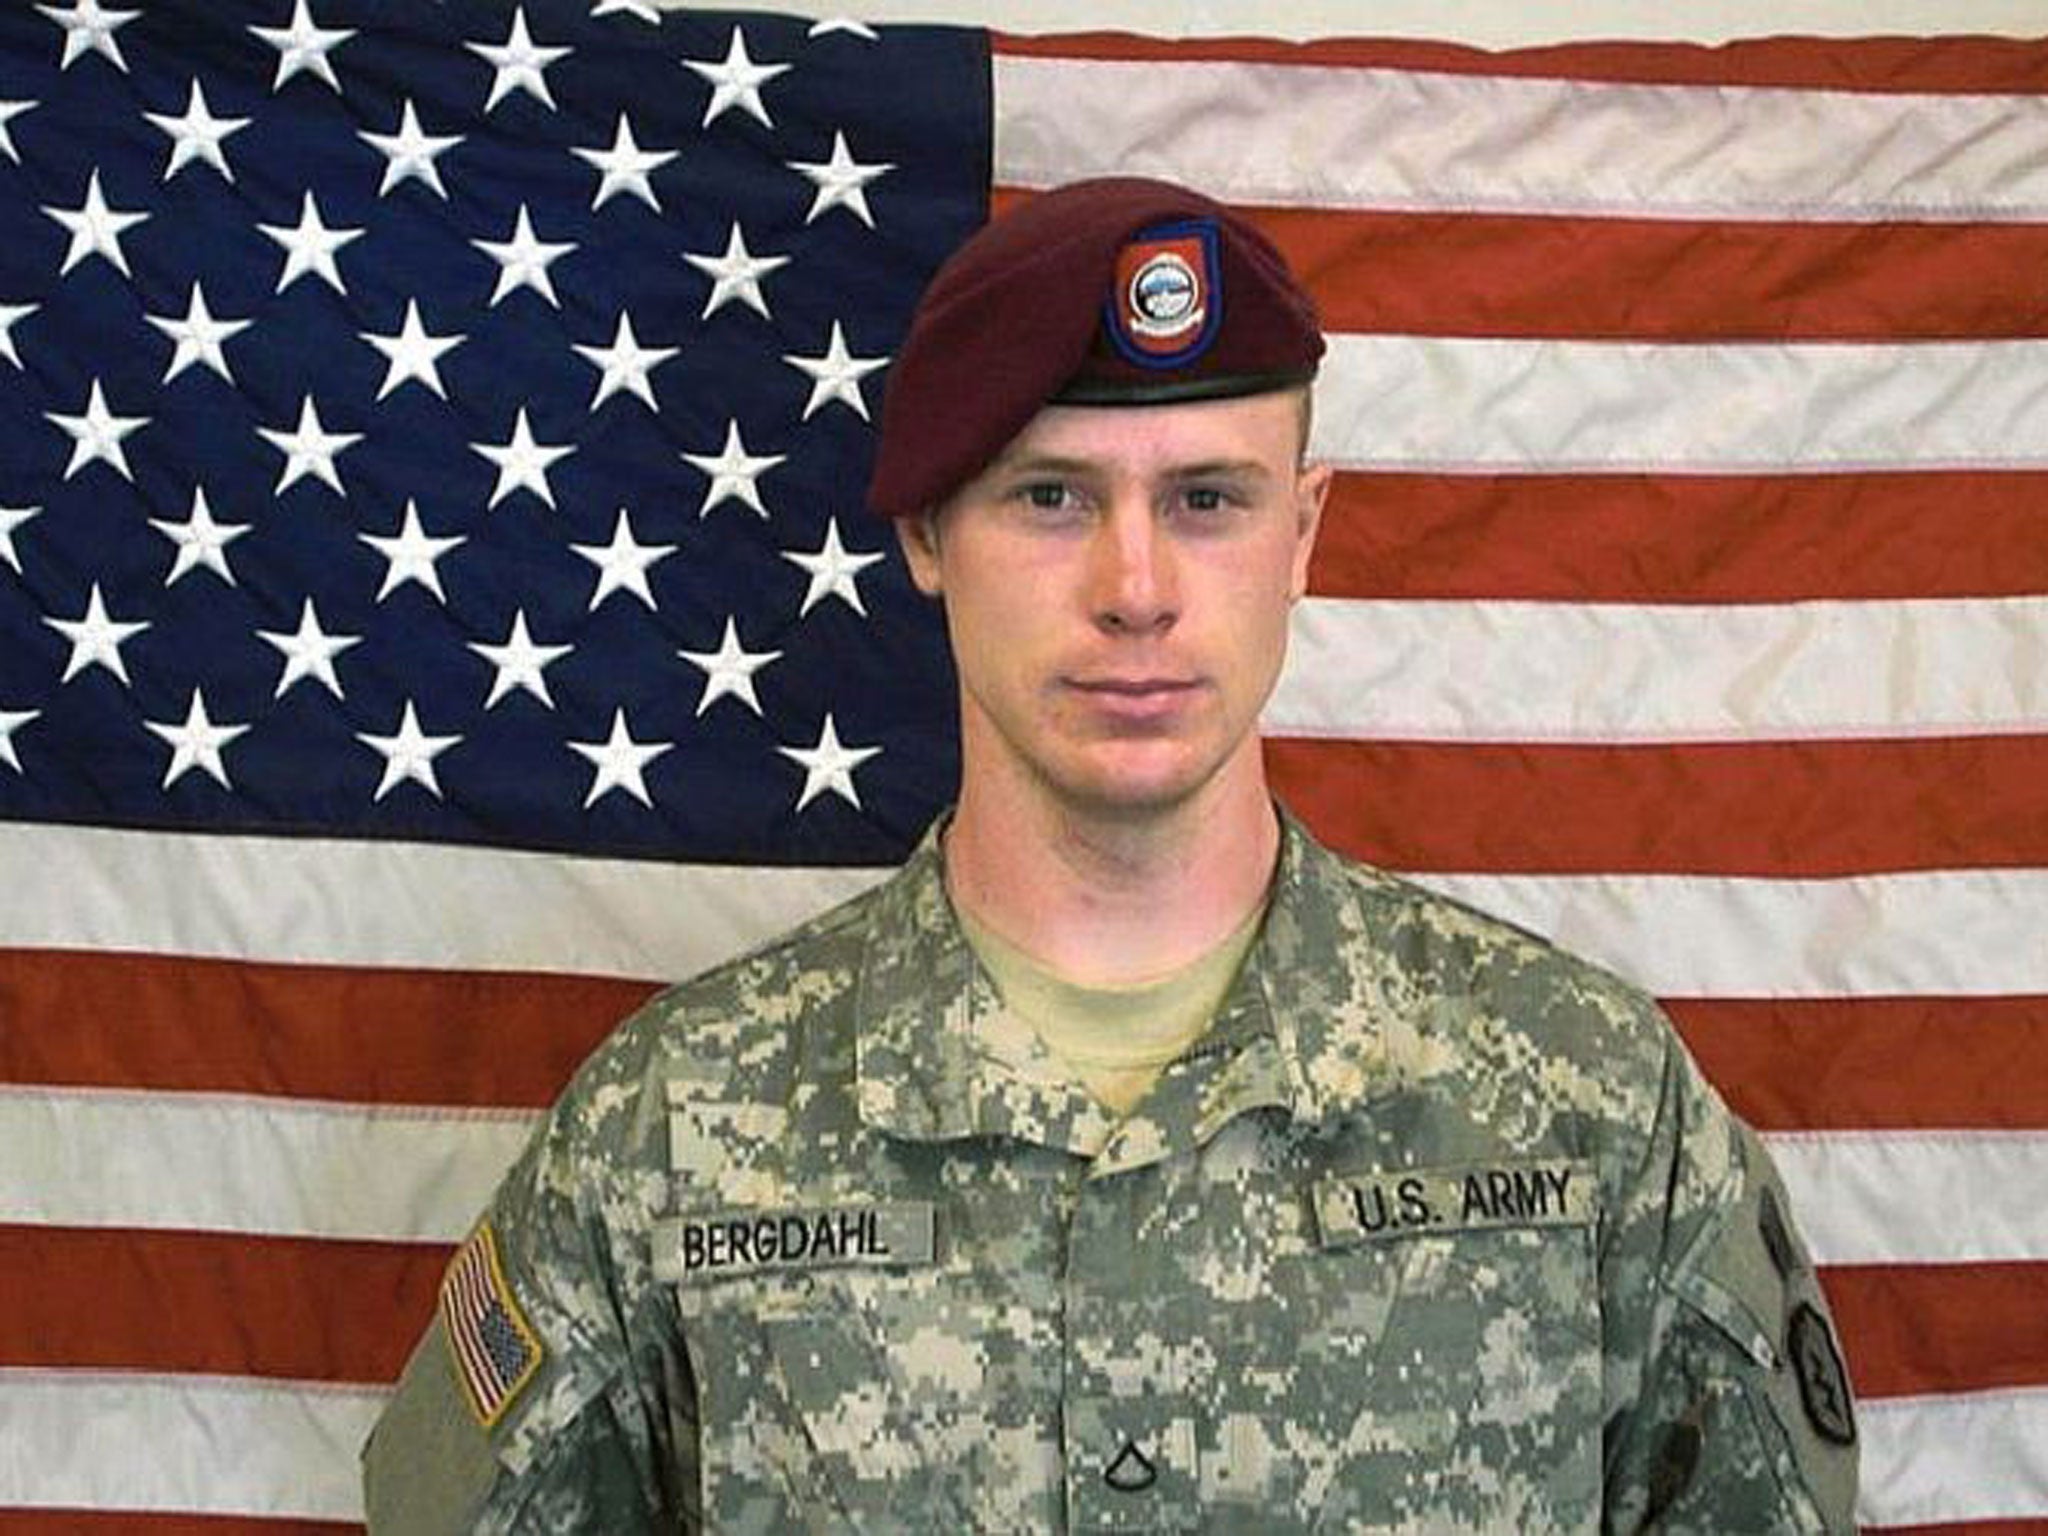 Private First Class(Pfc) Bowe Bergdahl, before his capture by the Taliban in Afghanistan. Bergdahl went missing from his post in Afghanistan on June 30, 2009